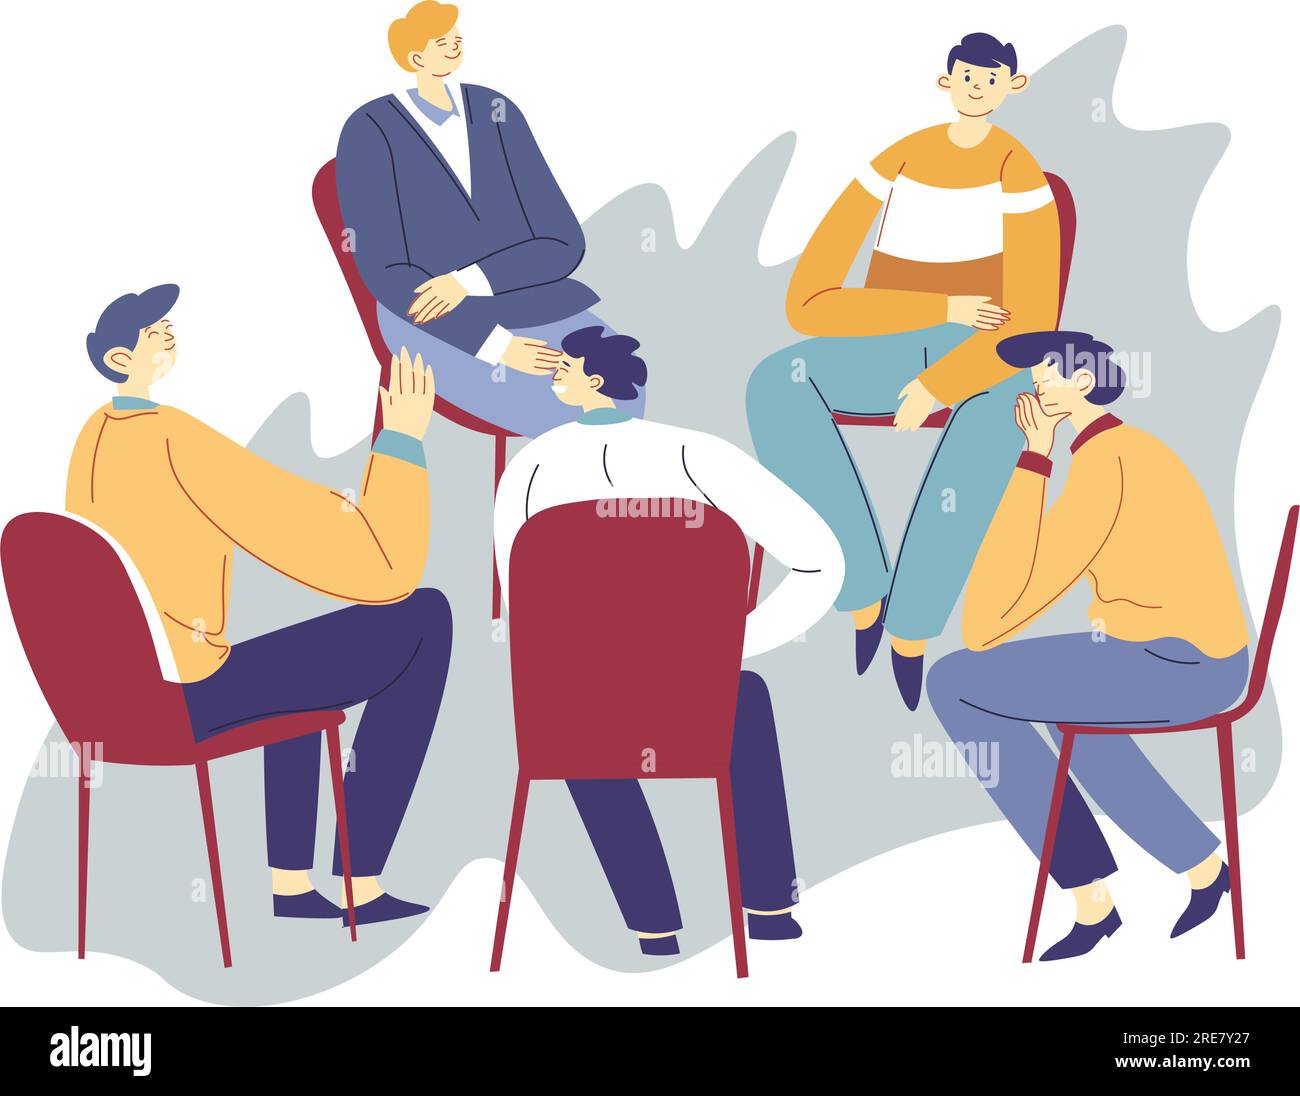 Group session or therapy, communication and support from friends and colleagues. Isolated people in circle sitting on chairs. Discussion and talk, ano Stock Vector